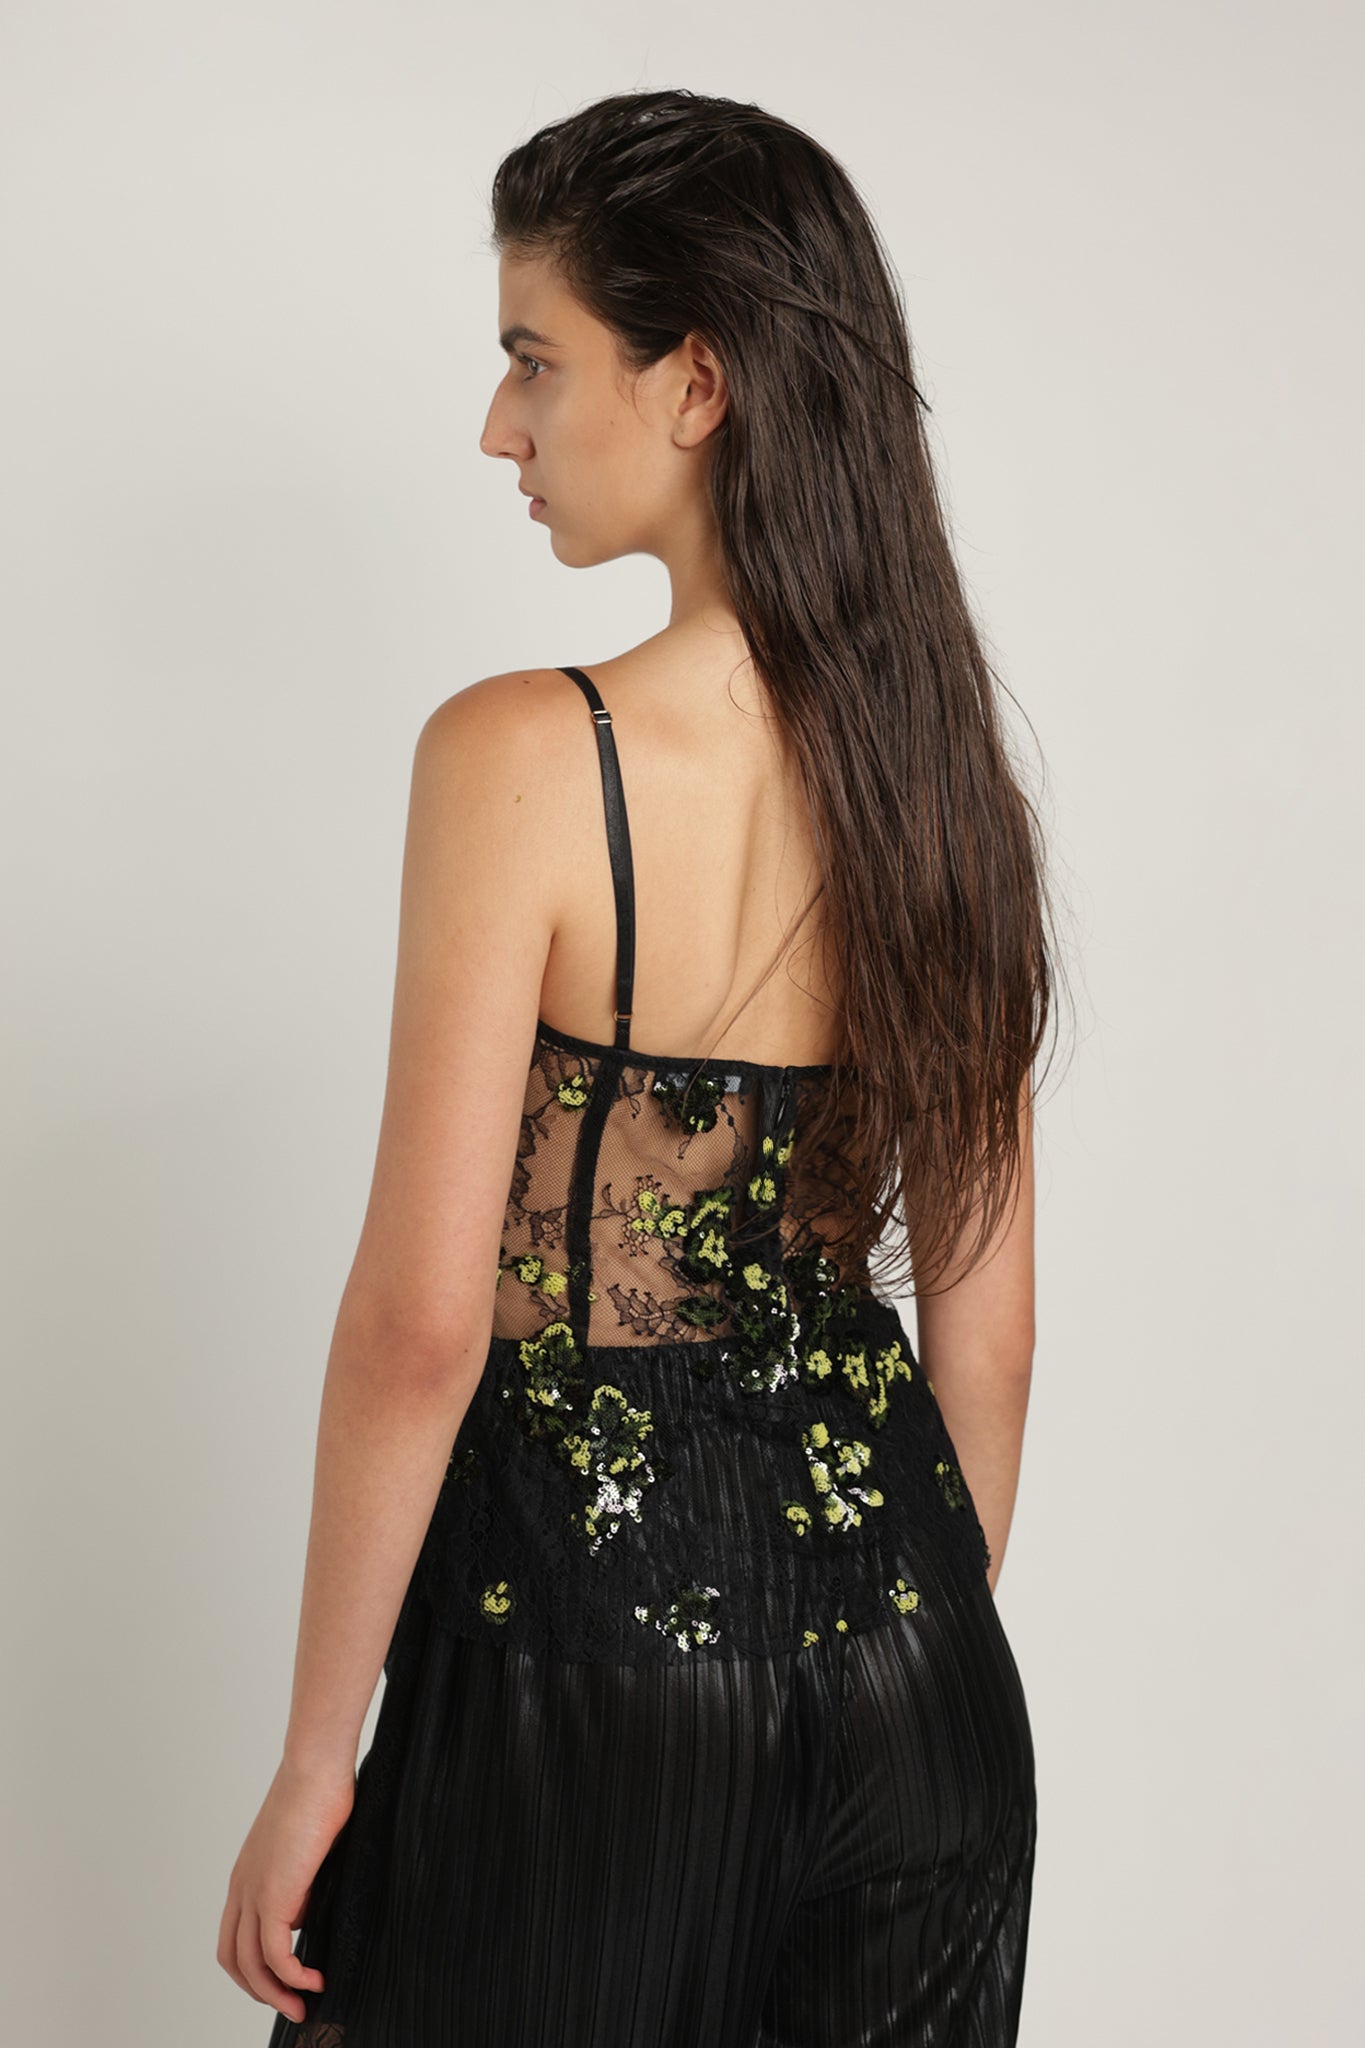 SABINA MUSAYEV - floral_sequin_on_soltice_lace_green_on_black_summer_24SABINA MUSAYEV - floral_sequin_on_soltice_lace_green_on_black_summer_24